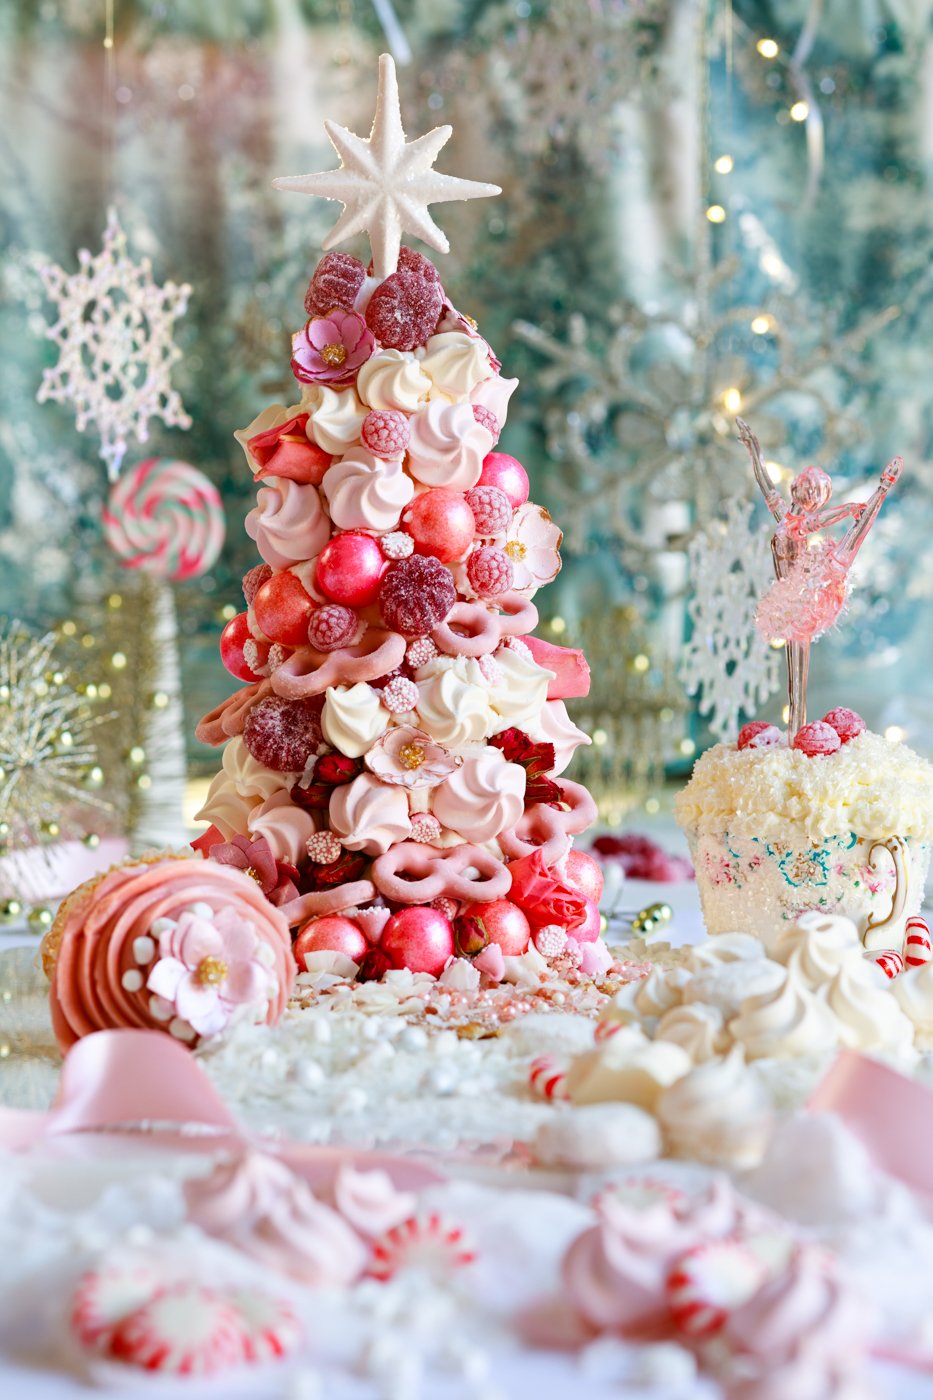 An edible candy Christmas tree with many shades of pink, red, and white